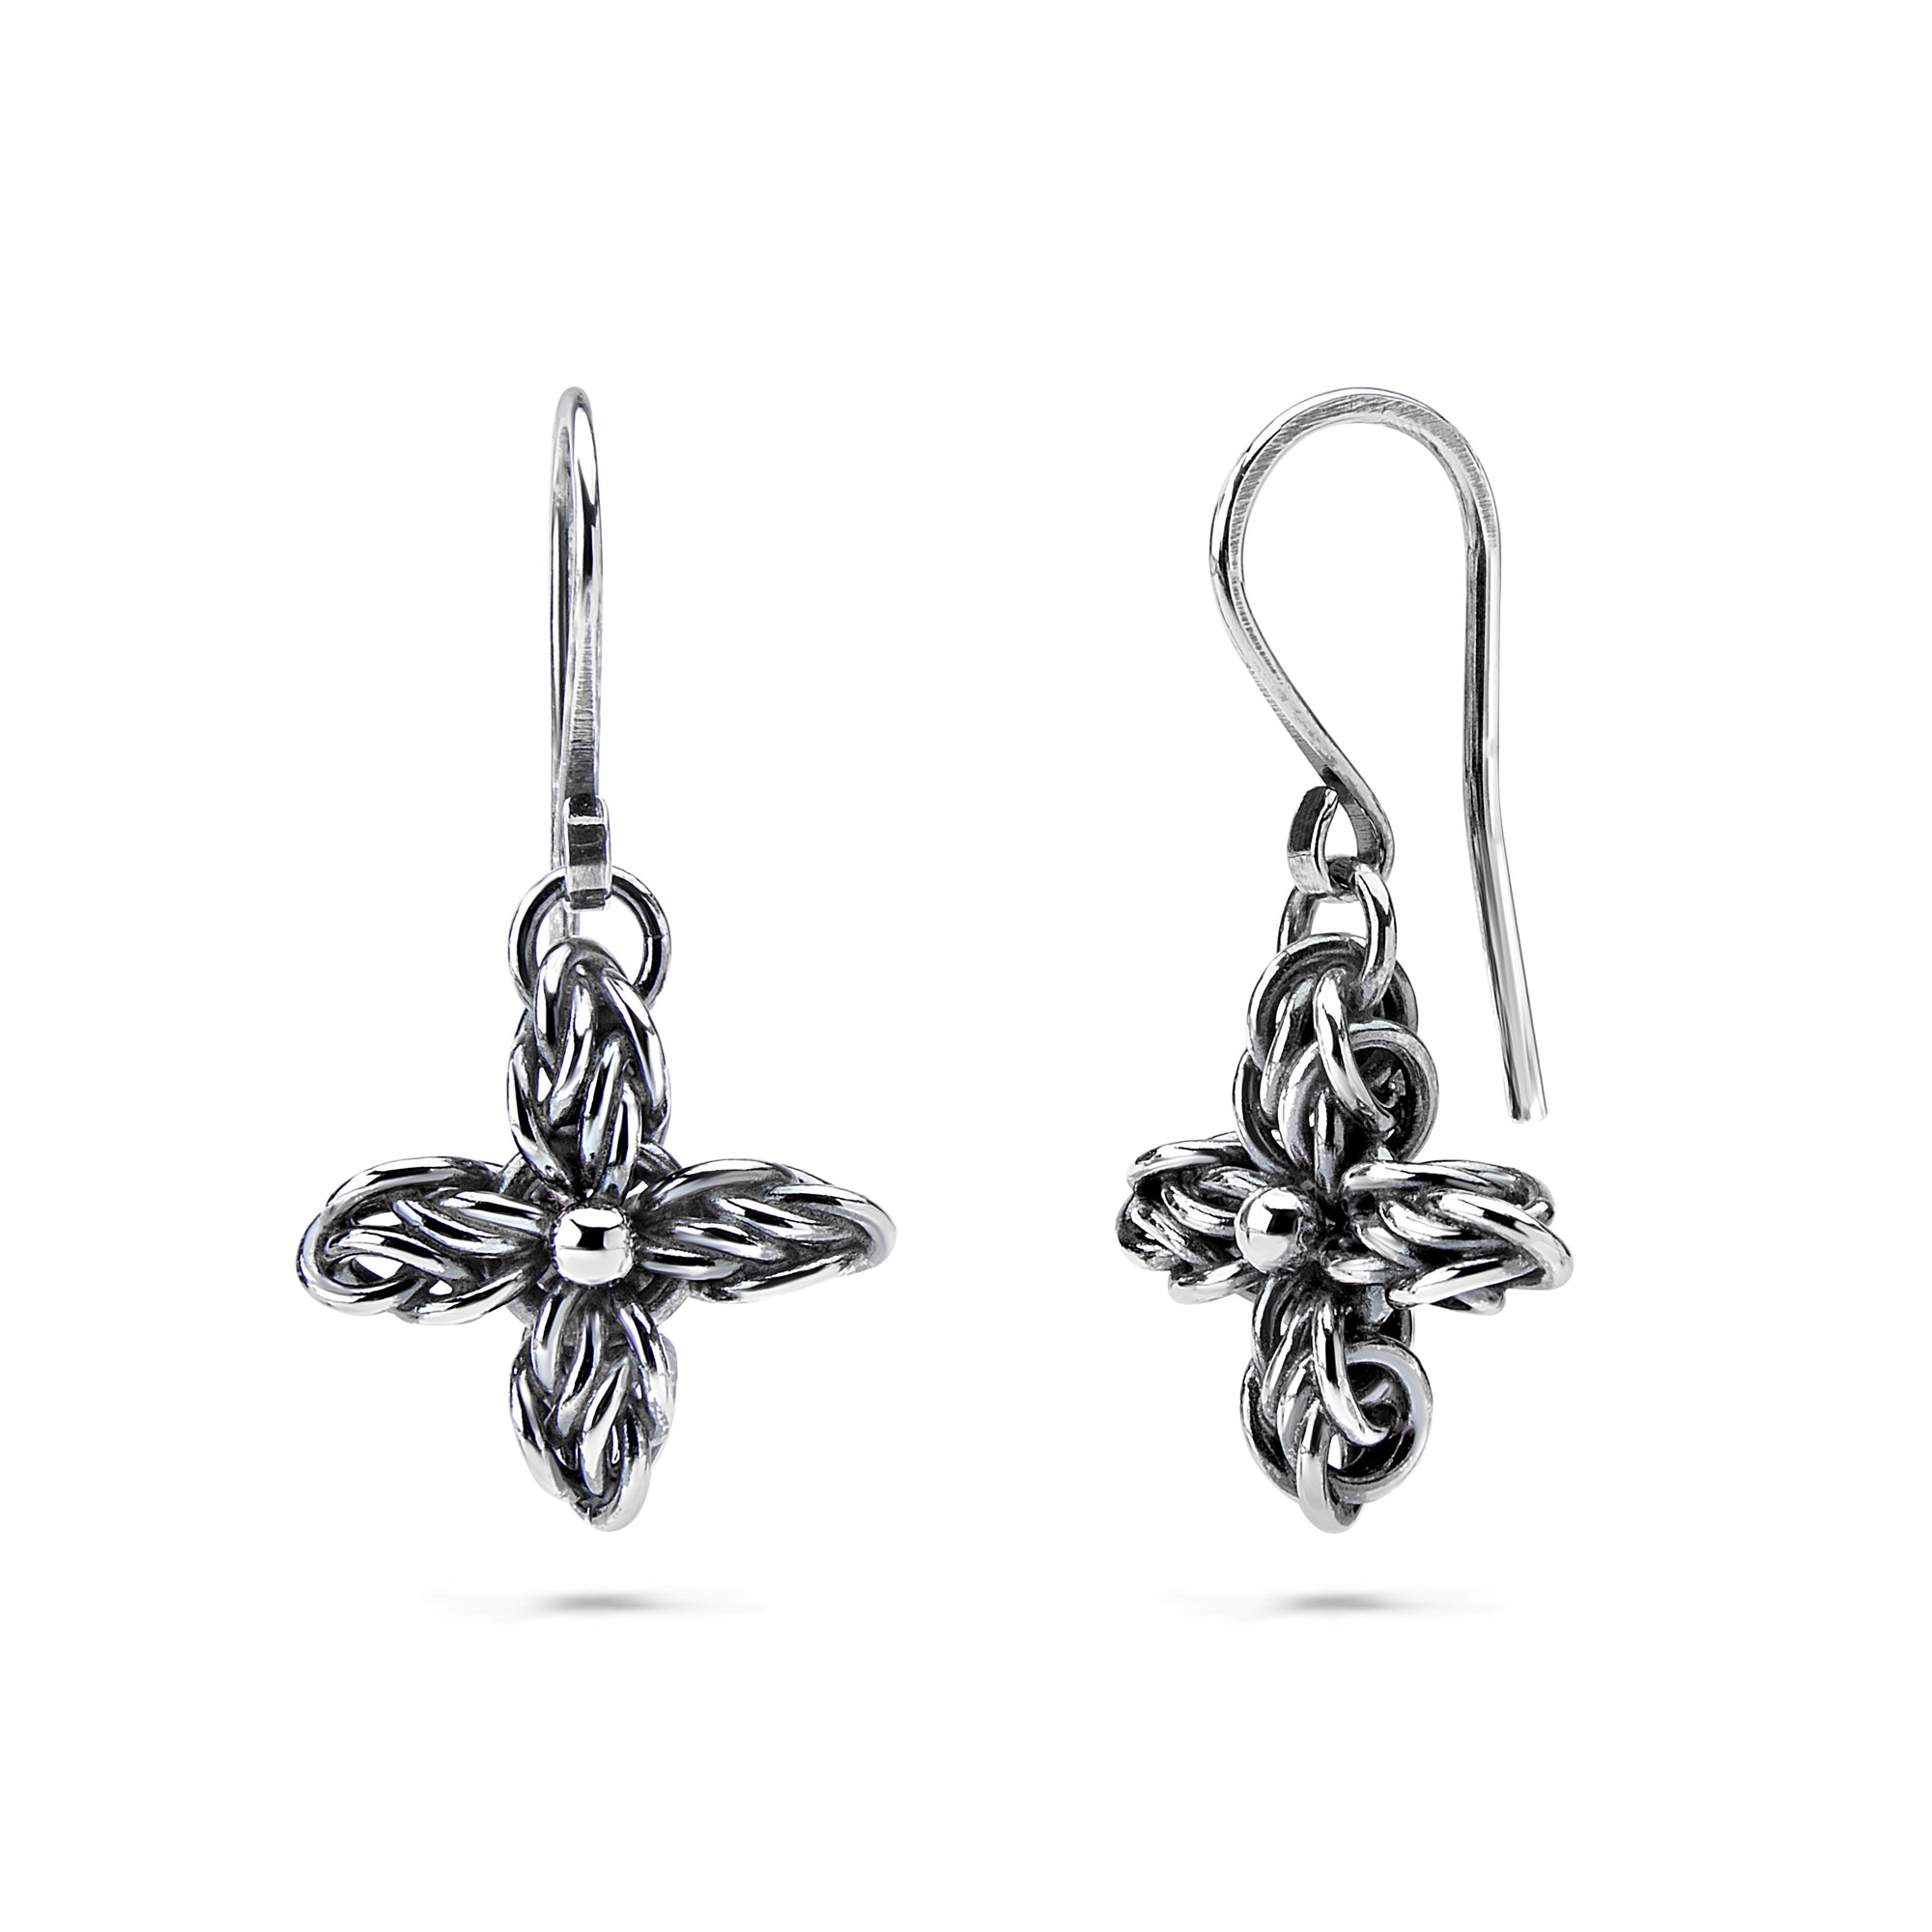 "Star Flower" Fused Chainmaille Earrings